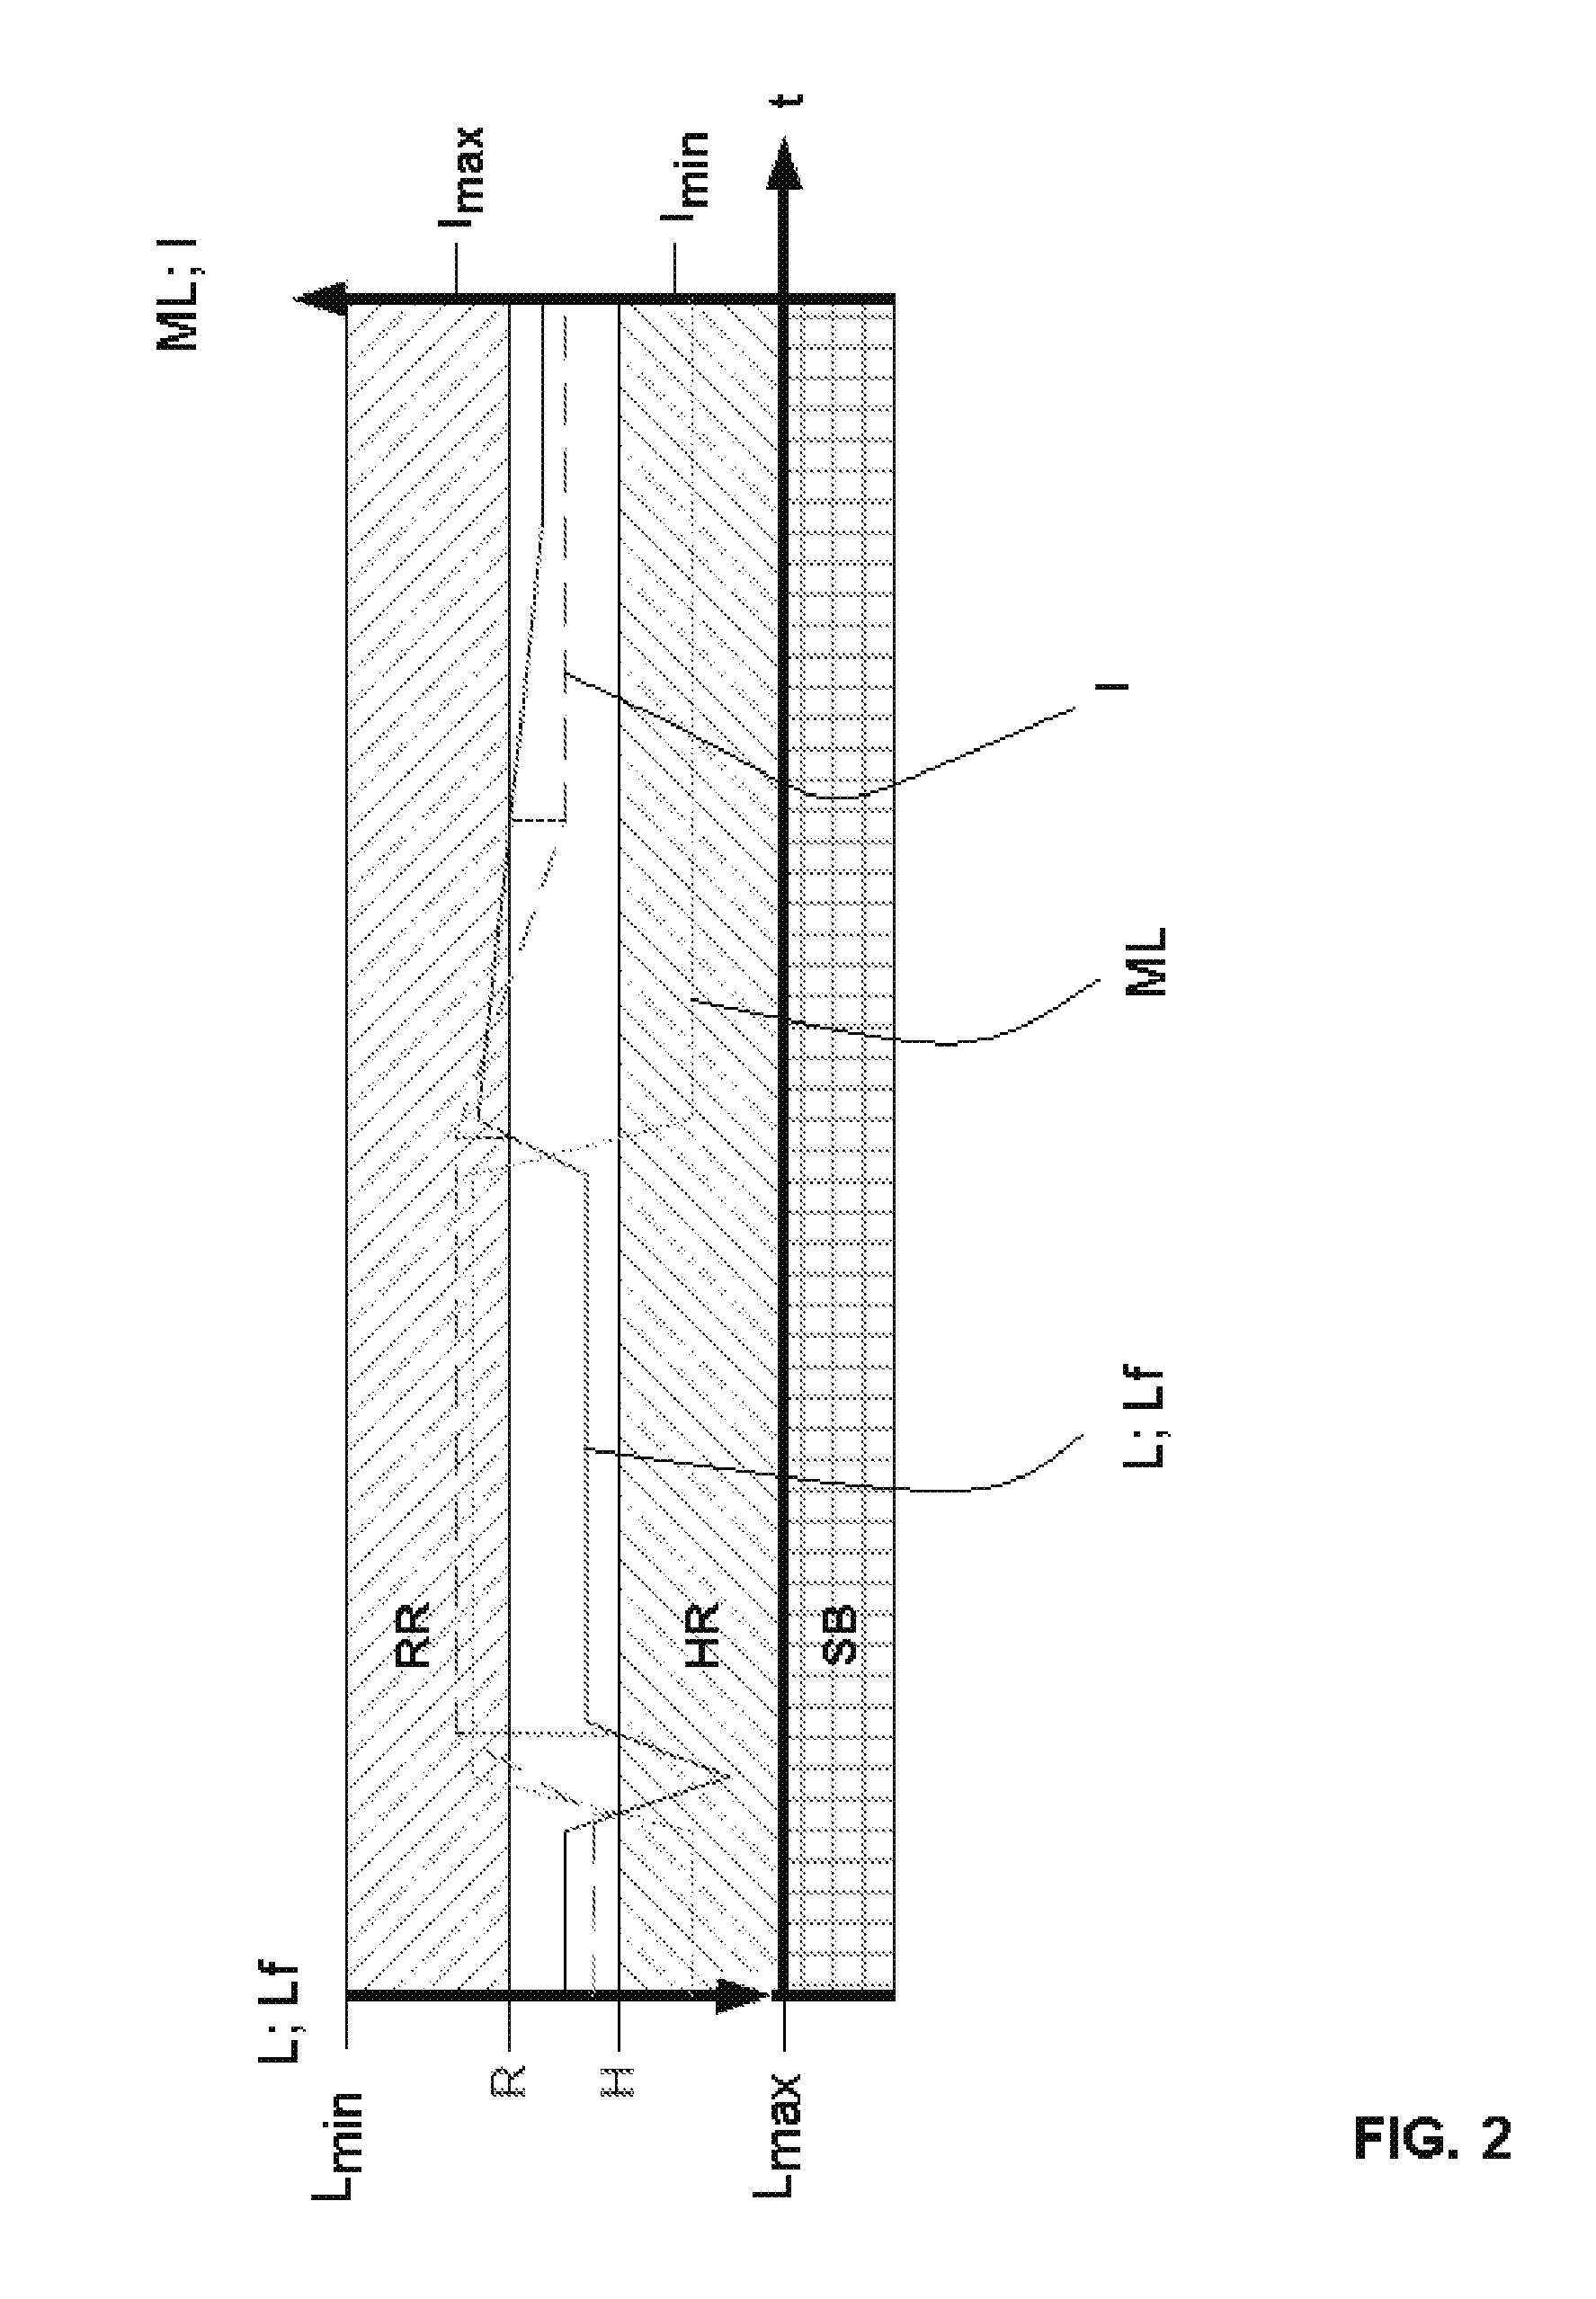 Method and circuit arrangement for detecting motor load without sensors and for controlling motor current according to load for a stepper motor